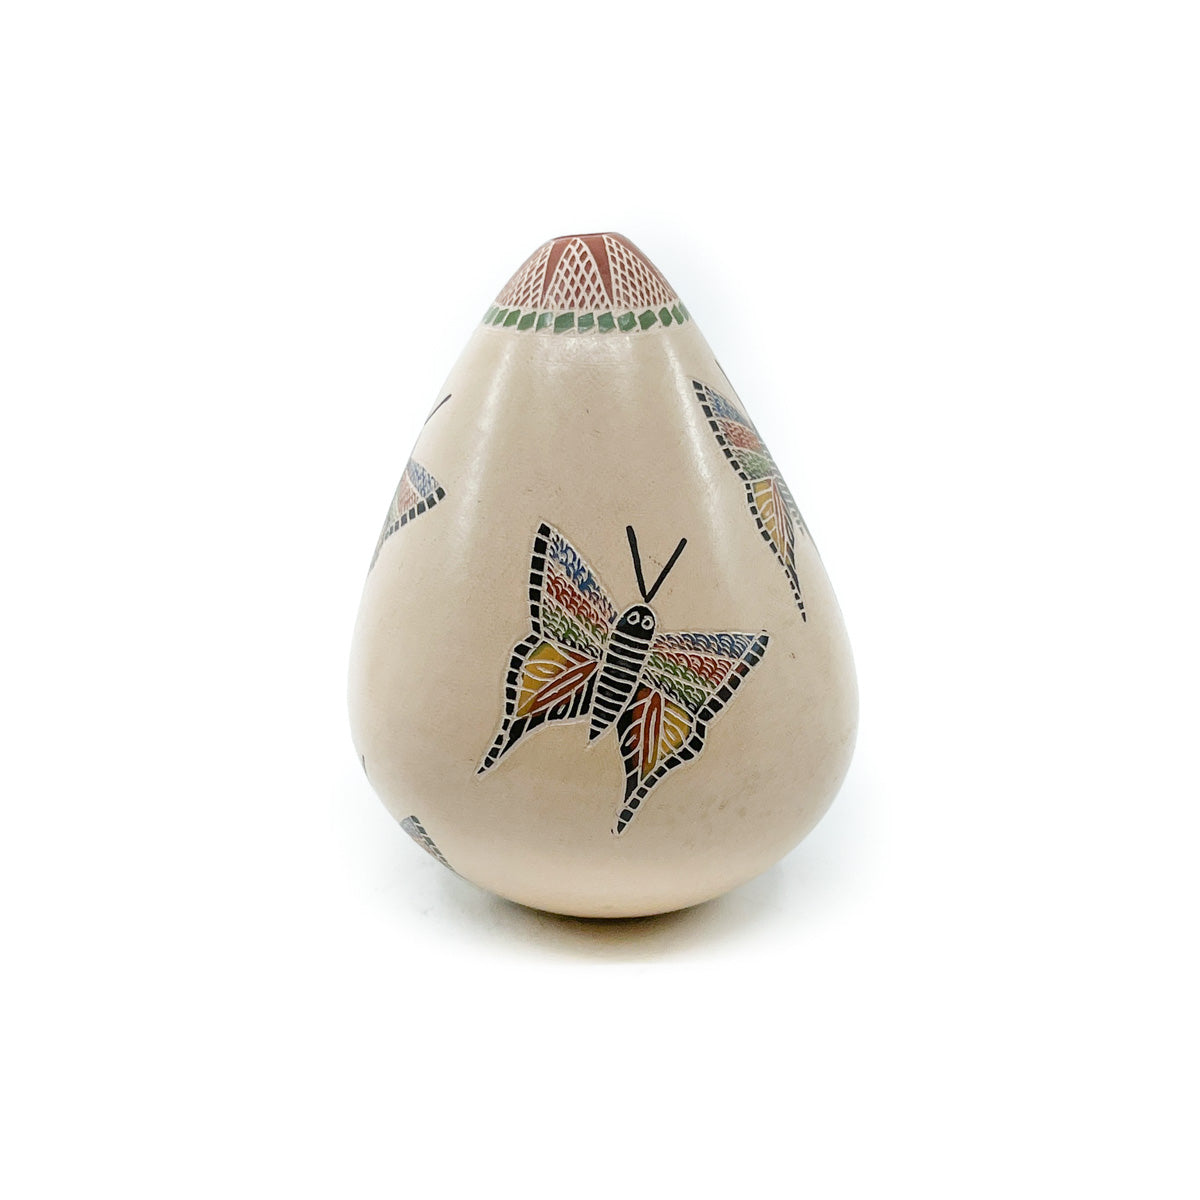 Small Raindrop Shaped Pot with Multi Colored Butterflies